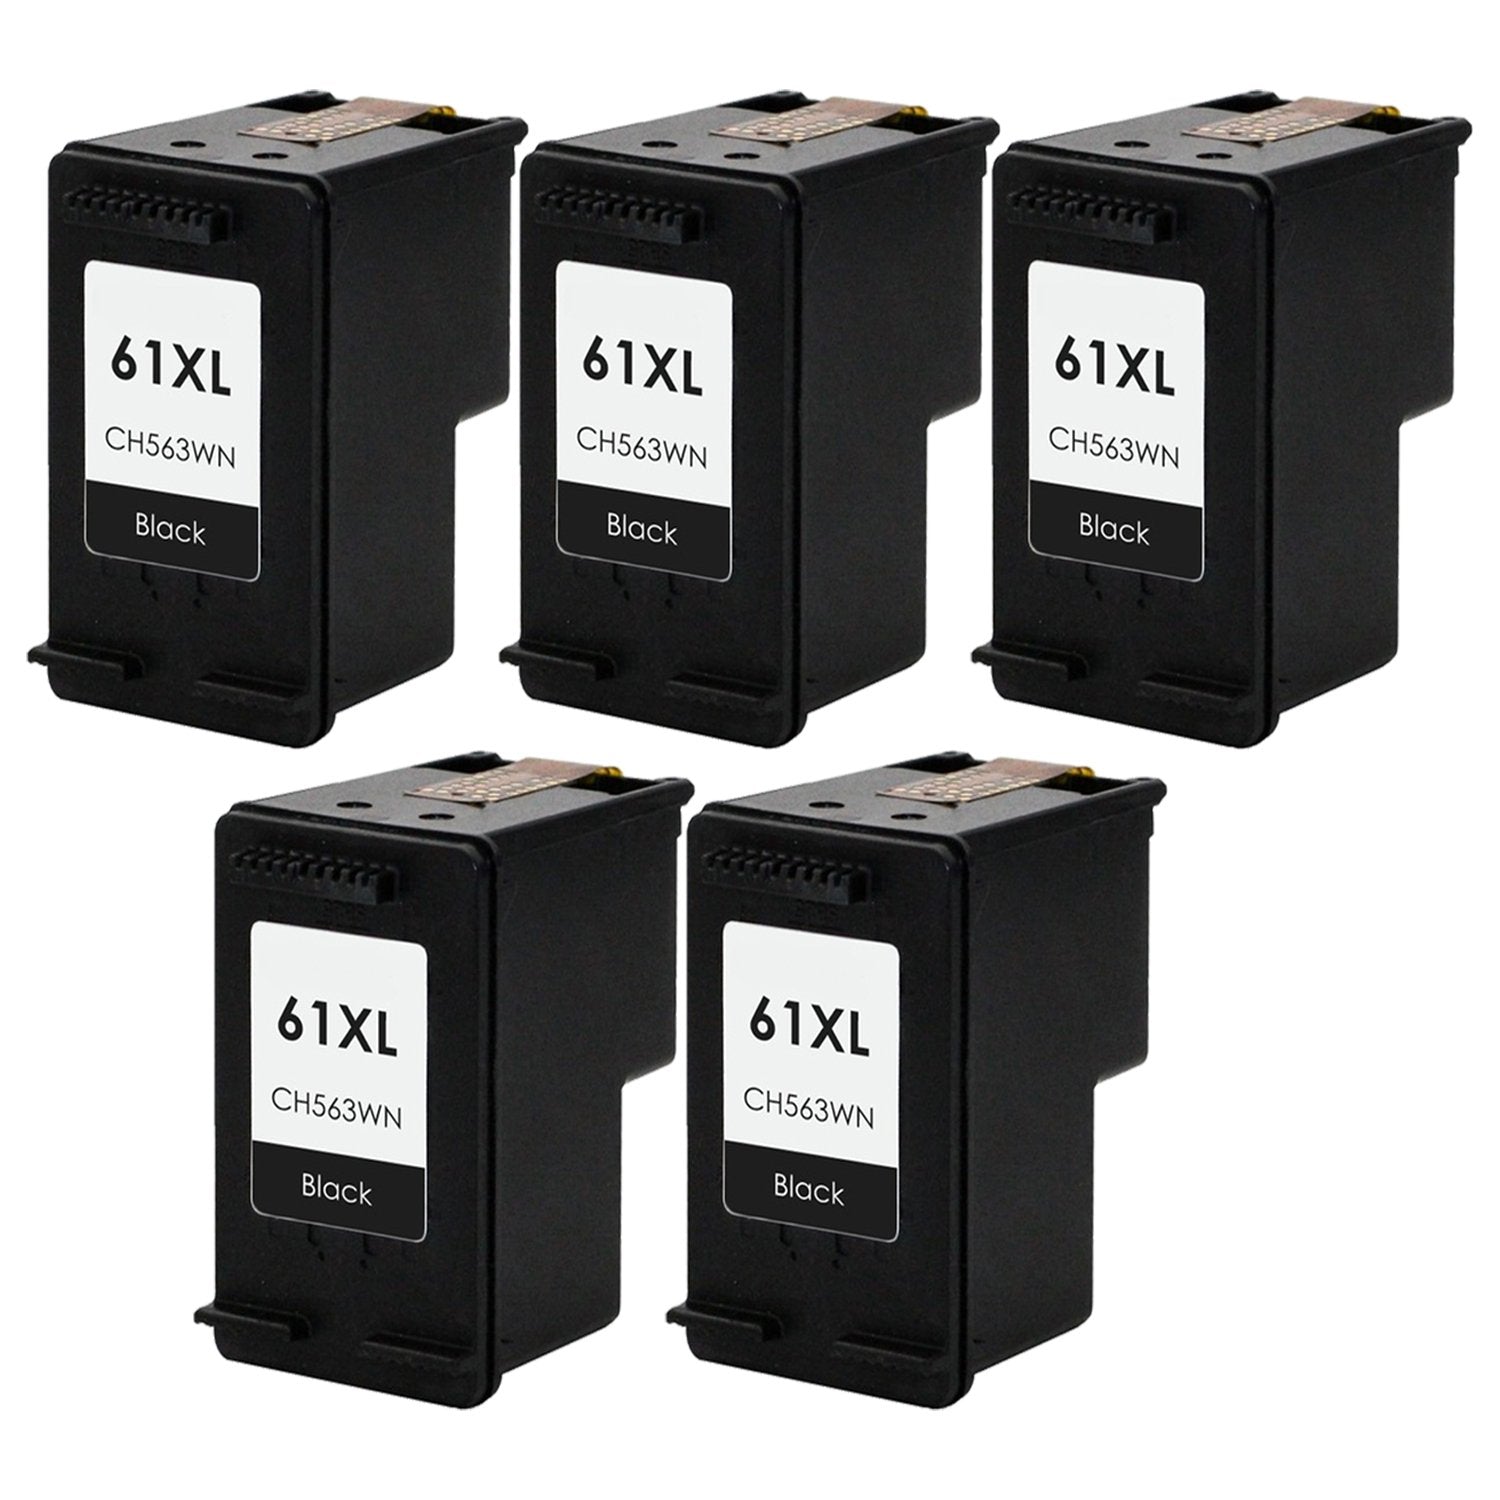 Absolute Toner Compatible CH563WN HP 61XL Black High Yield Ink Cartridge | Absolute Toner HP Ink Cartridges